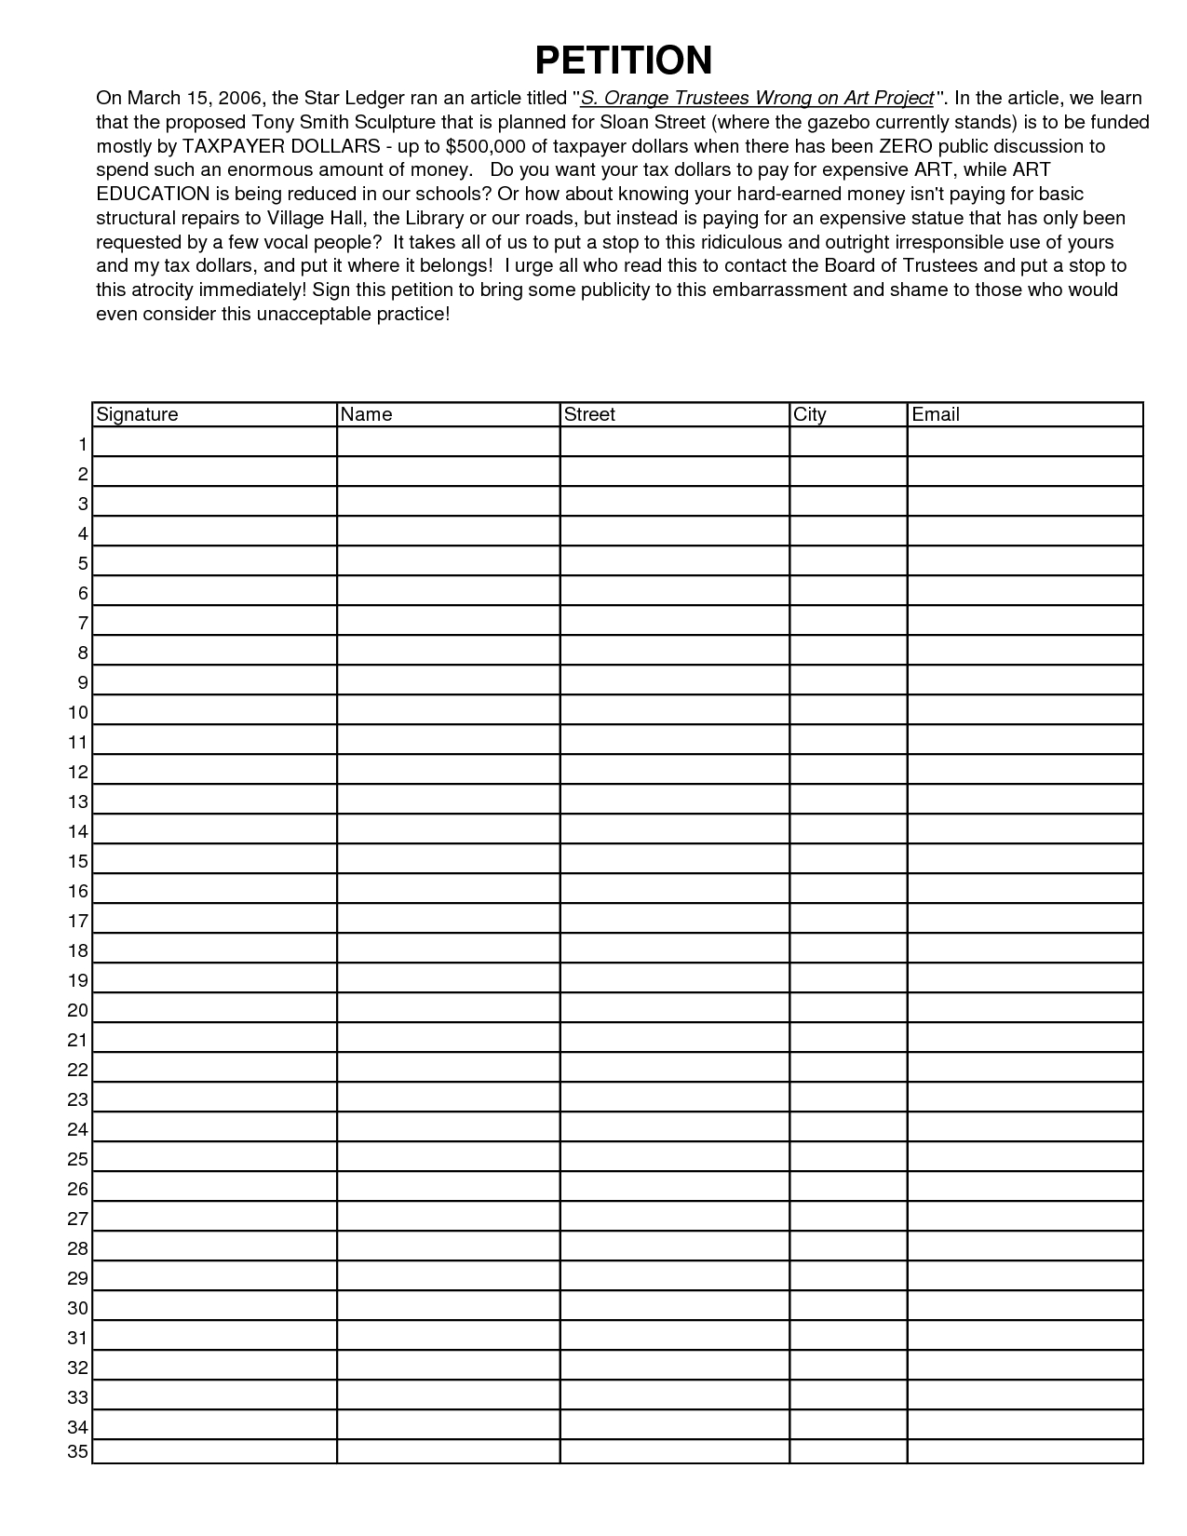 30-petition-templates-how-to-write-petition-guide